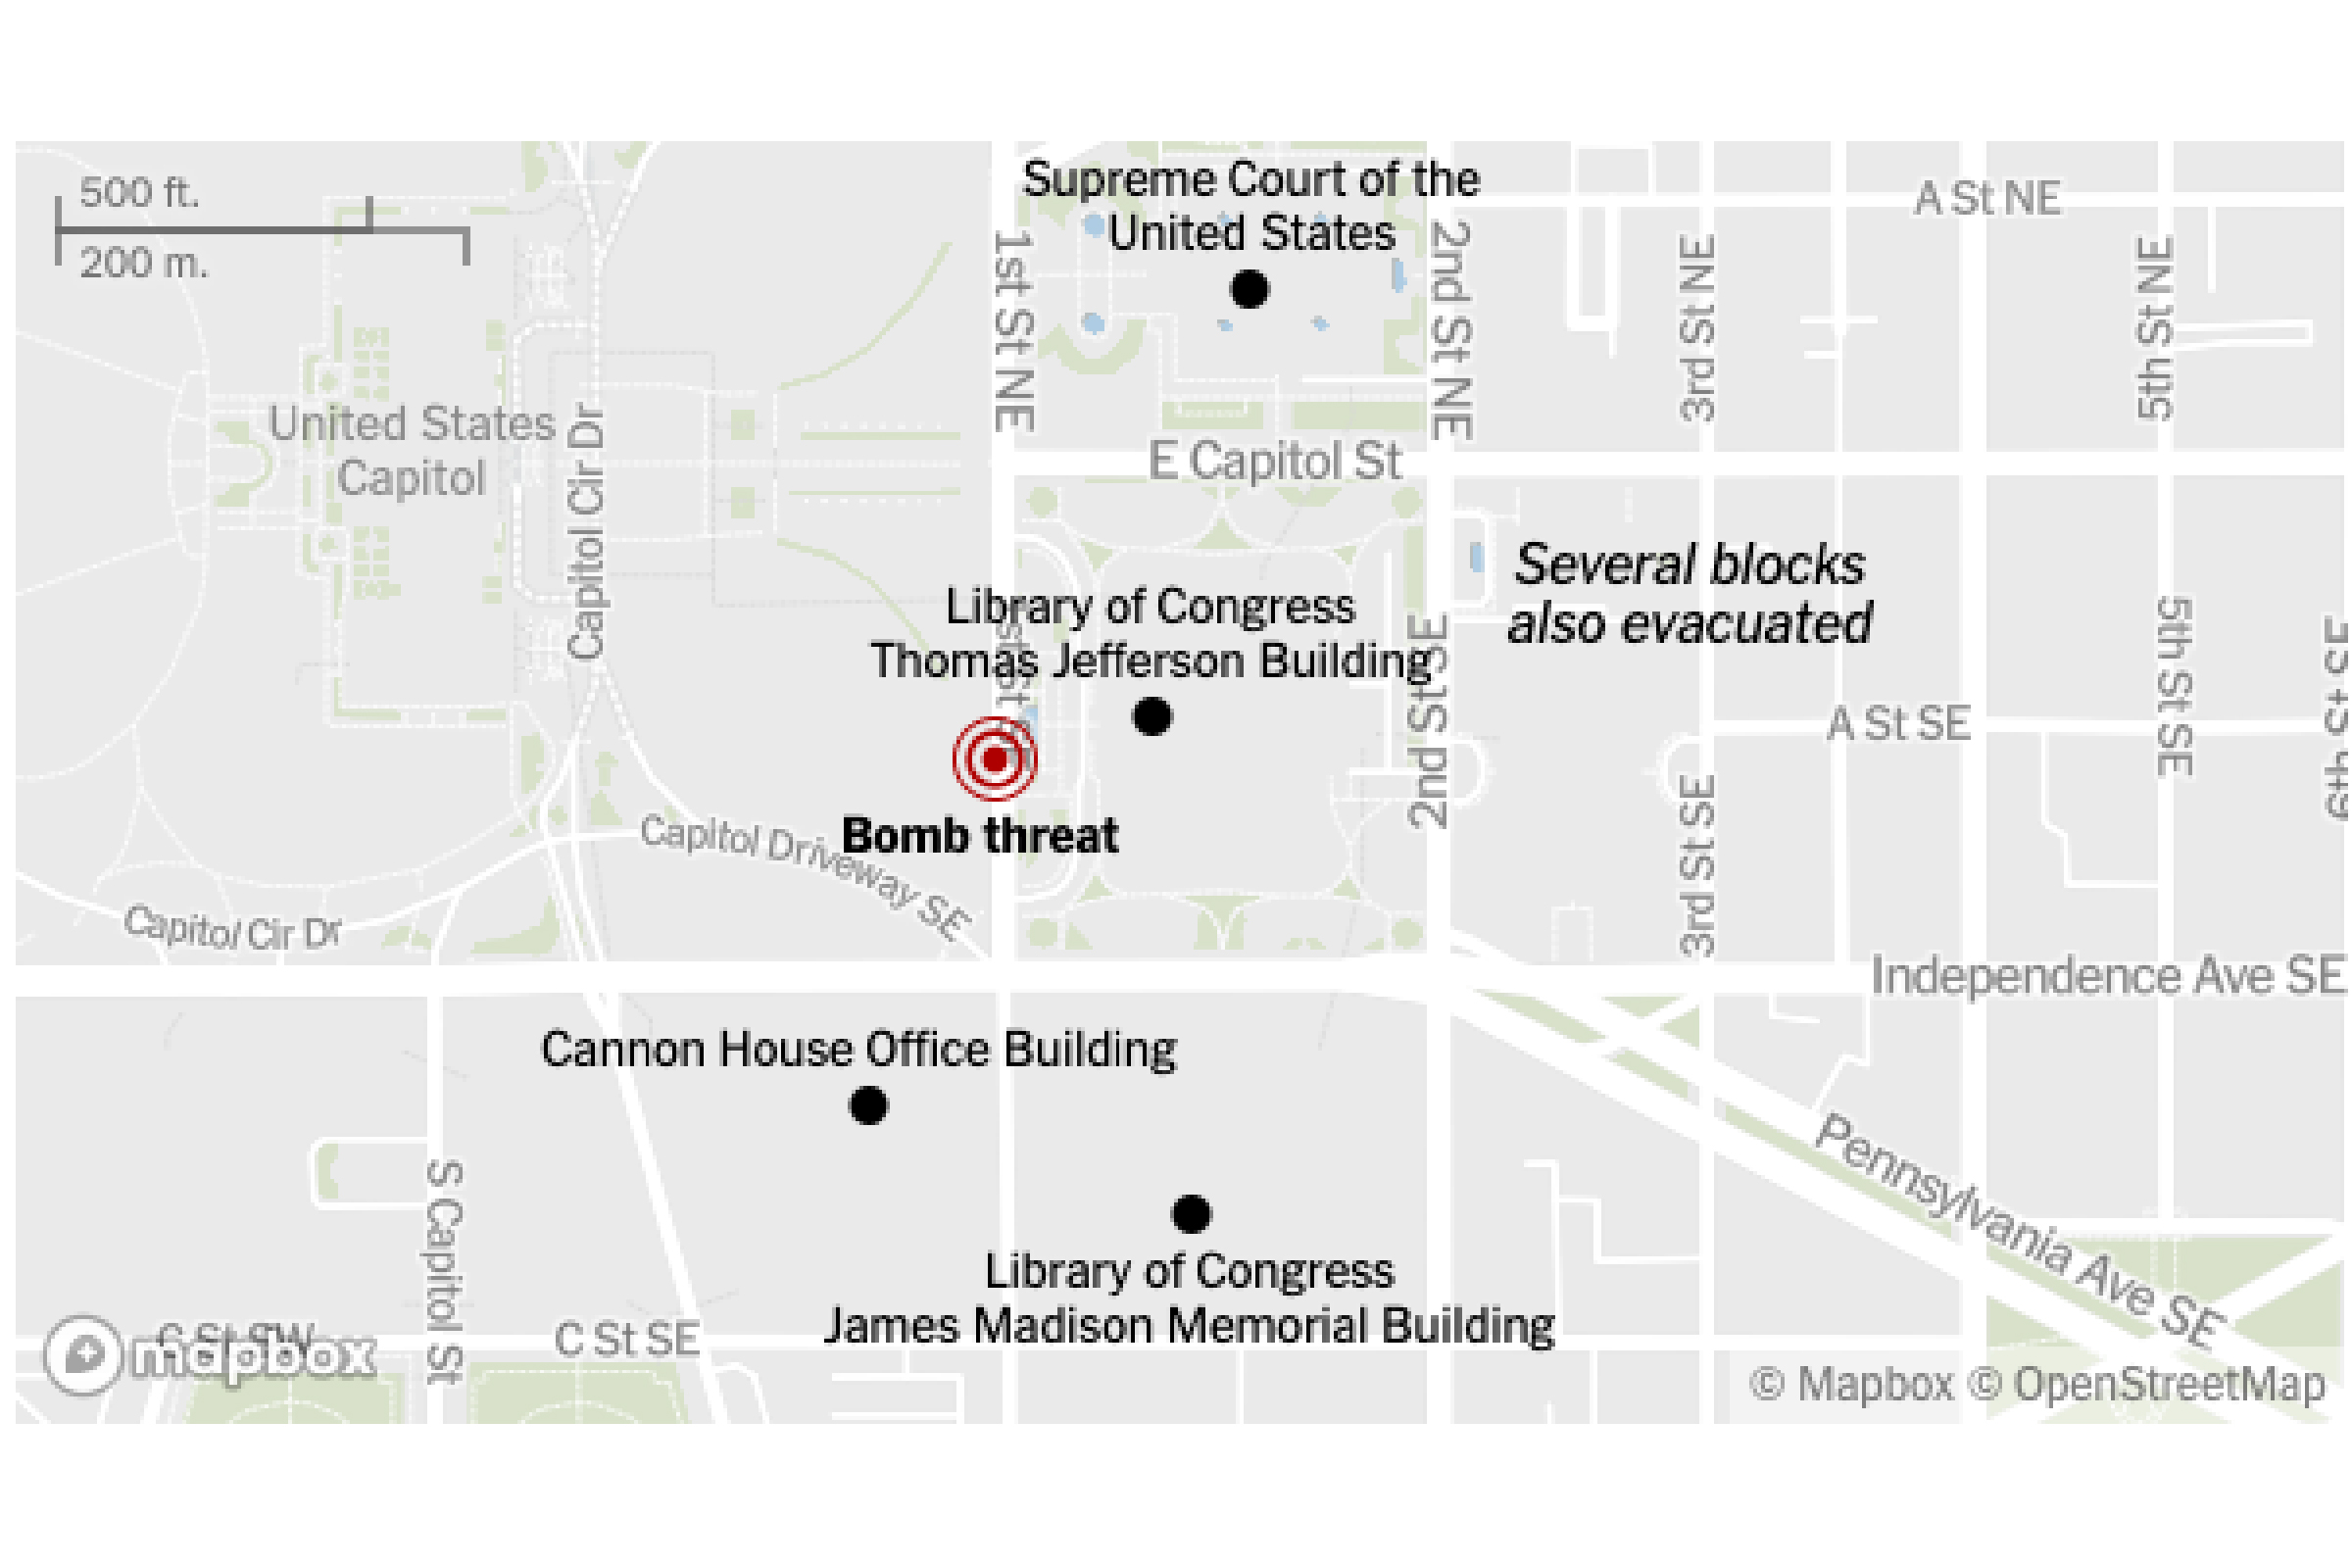 Mapped location of a D.C. bomb threat, including key buildings and evacuated blocks.